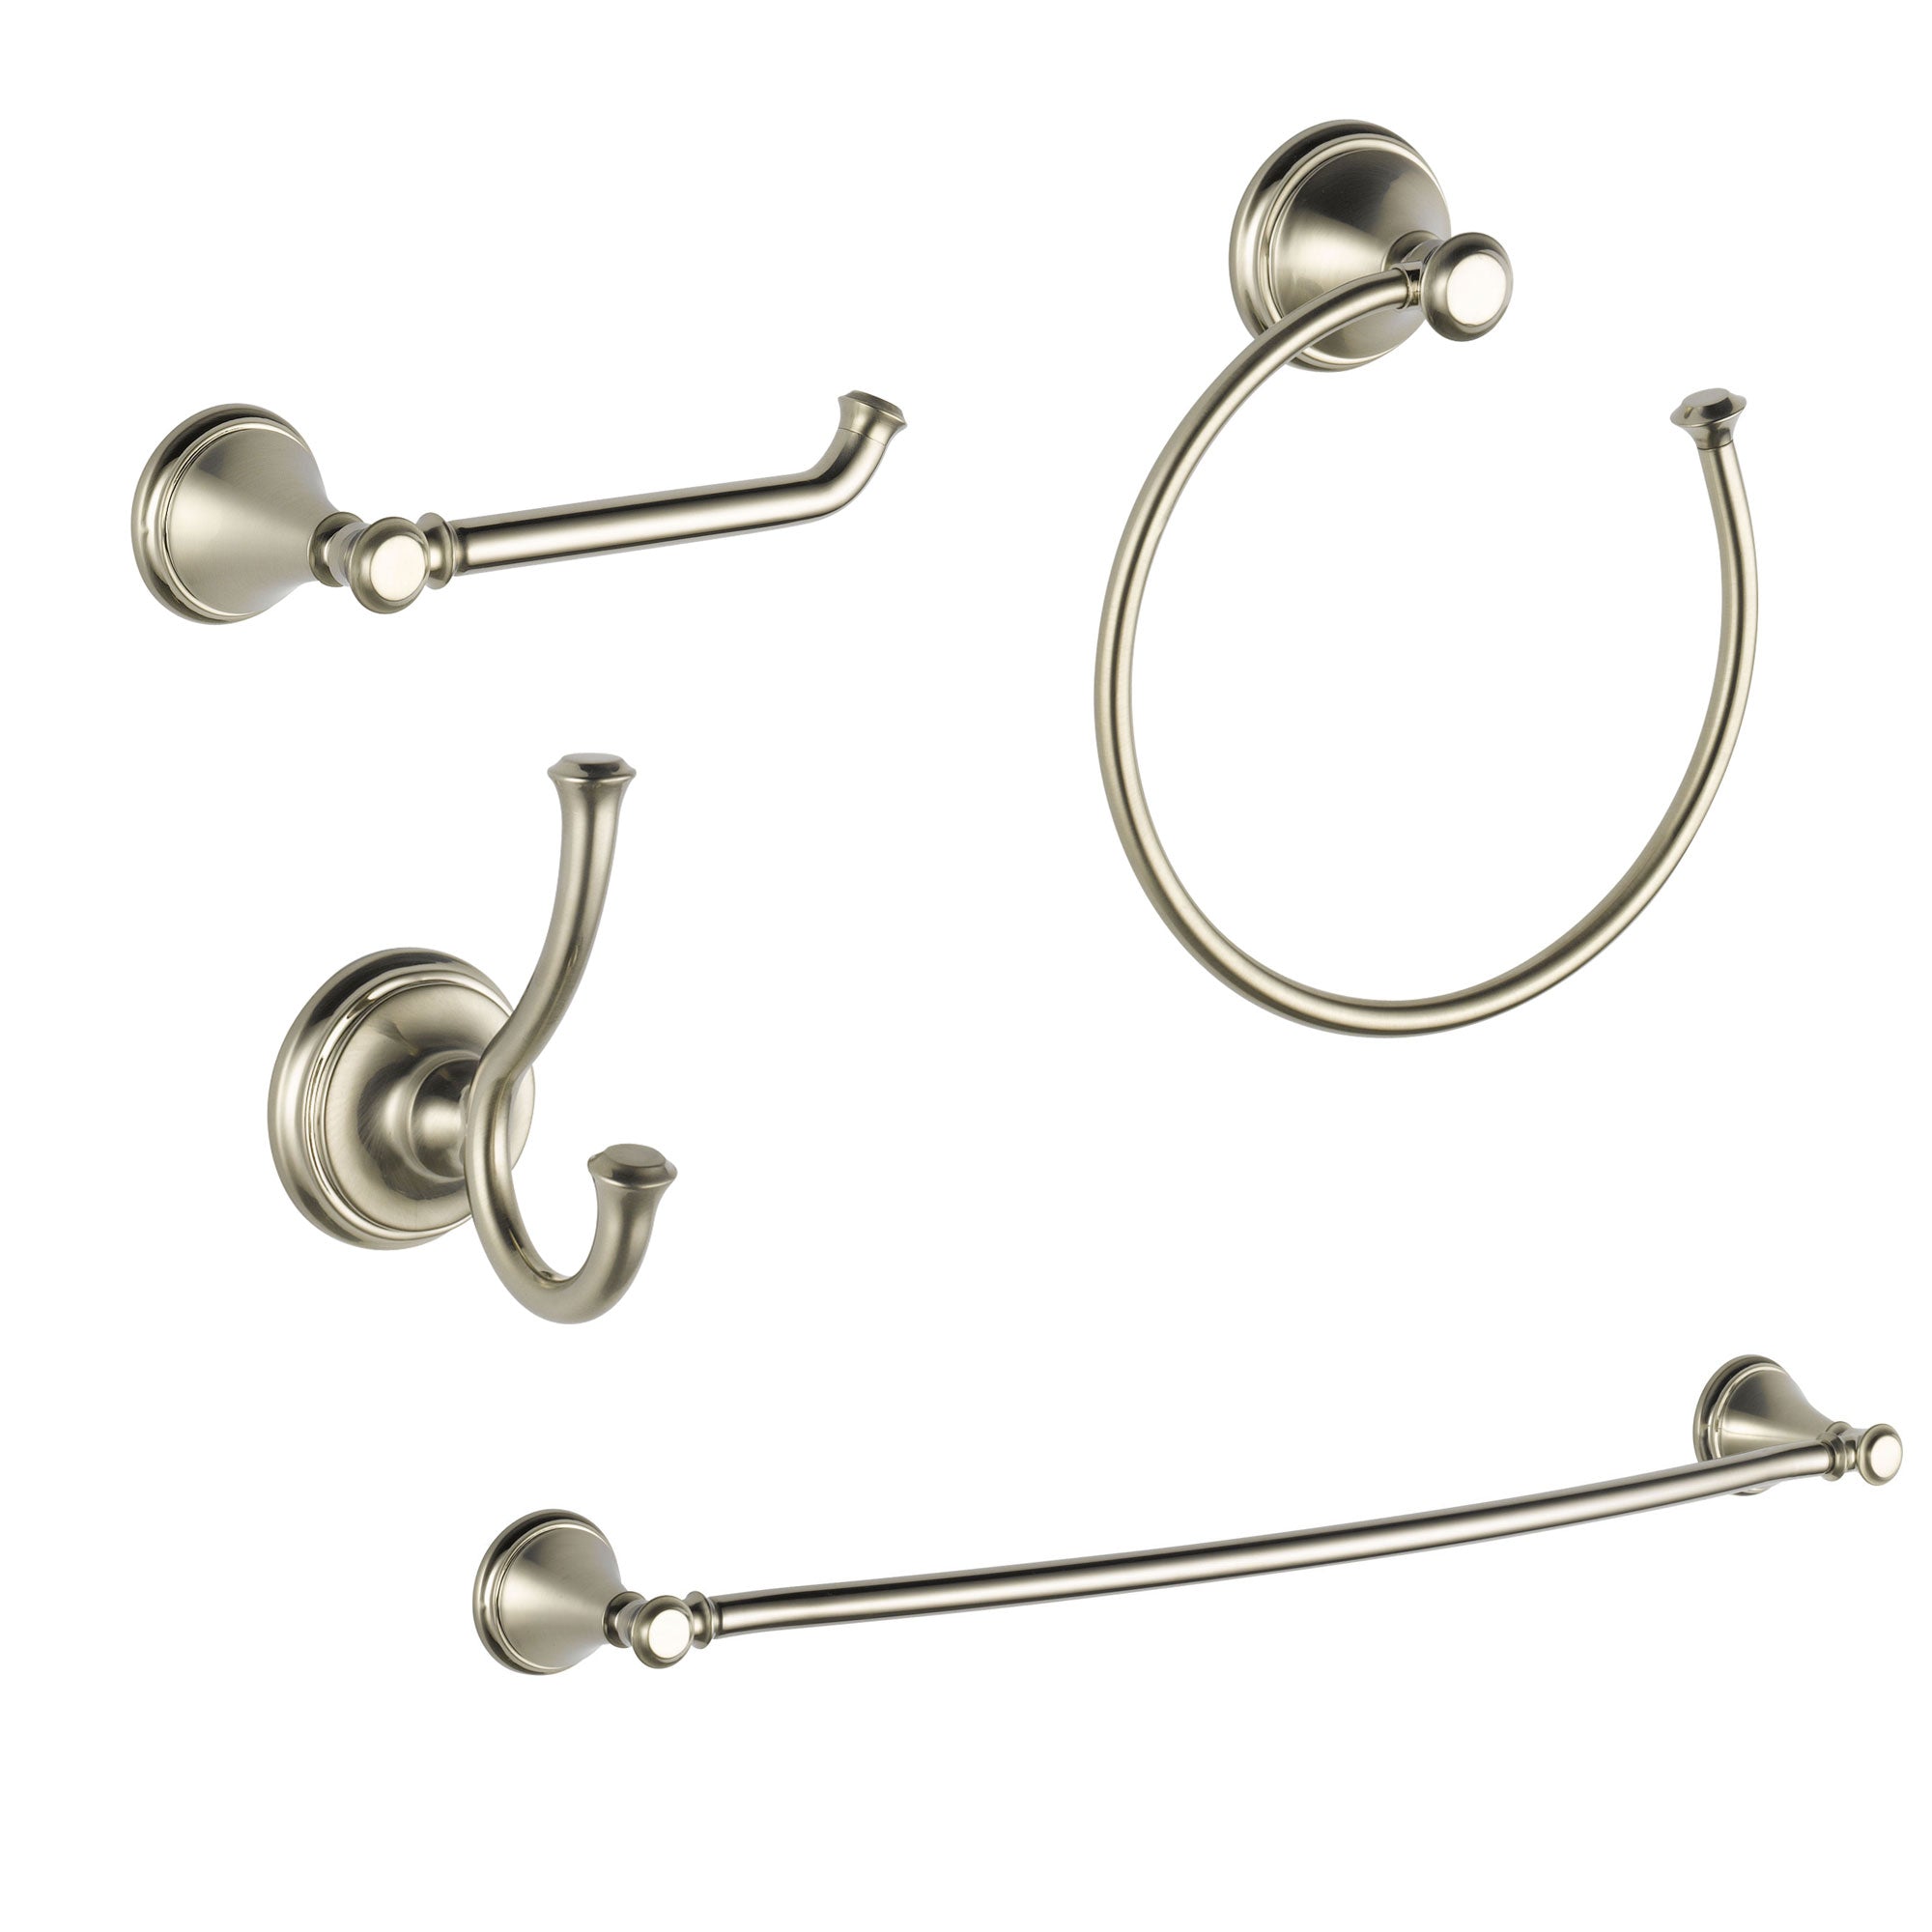 Delta Cassidy Stainless Steel Finish STANDARD Bathroom Accessory Set Includes: 24" Towel Bar, Toilet Paper Holder, Robe Hook, and Towel Ring D10020AP